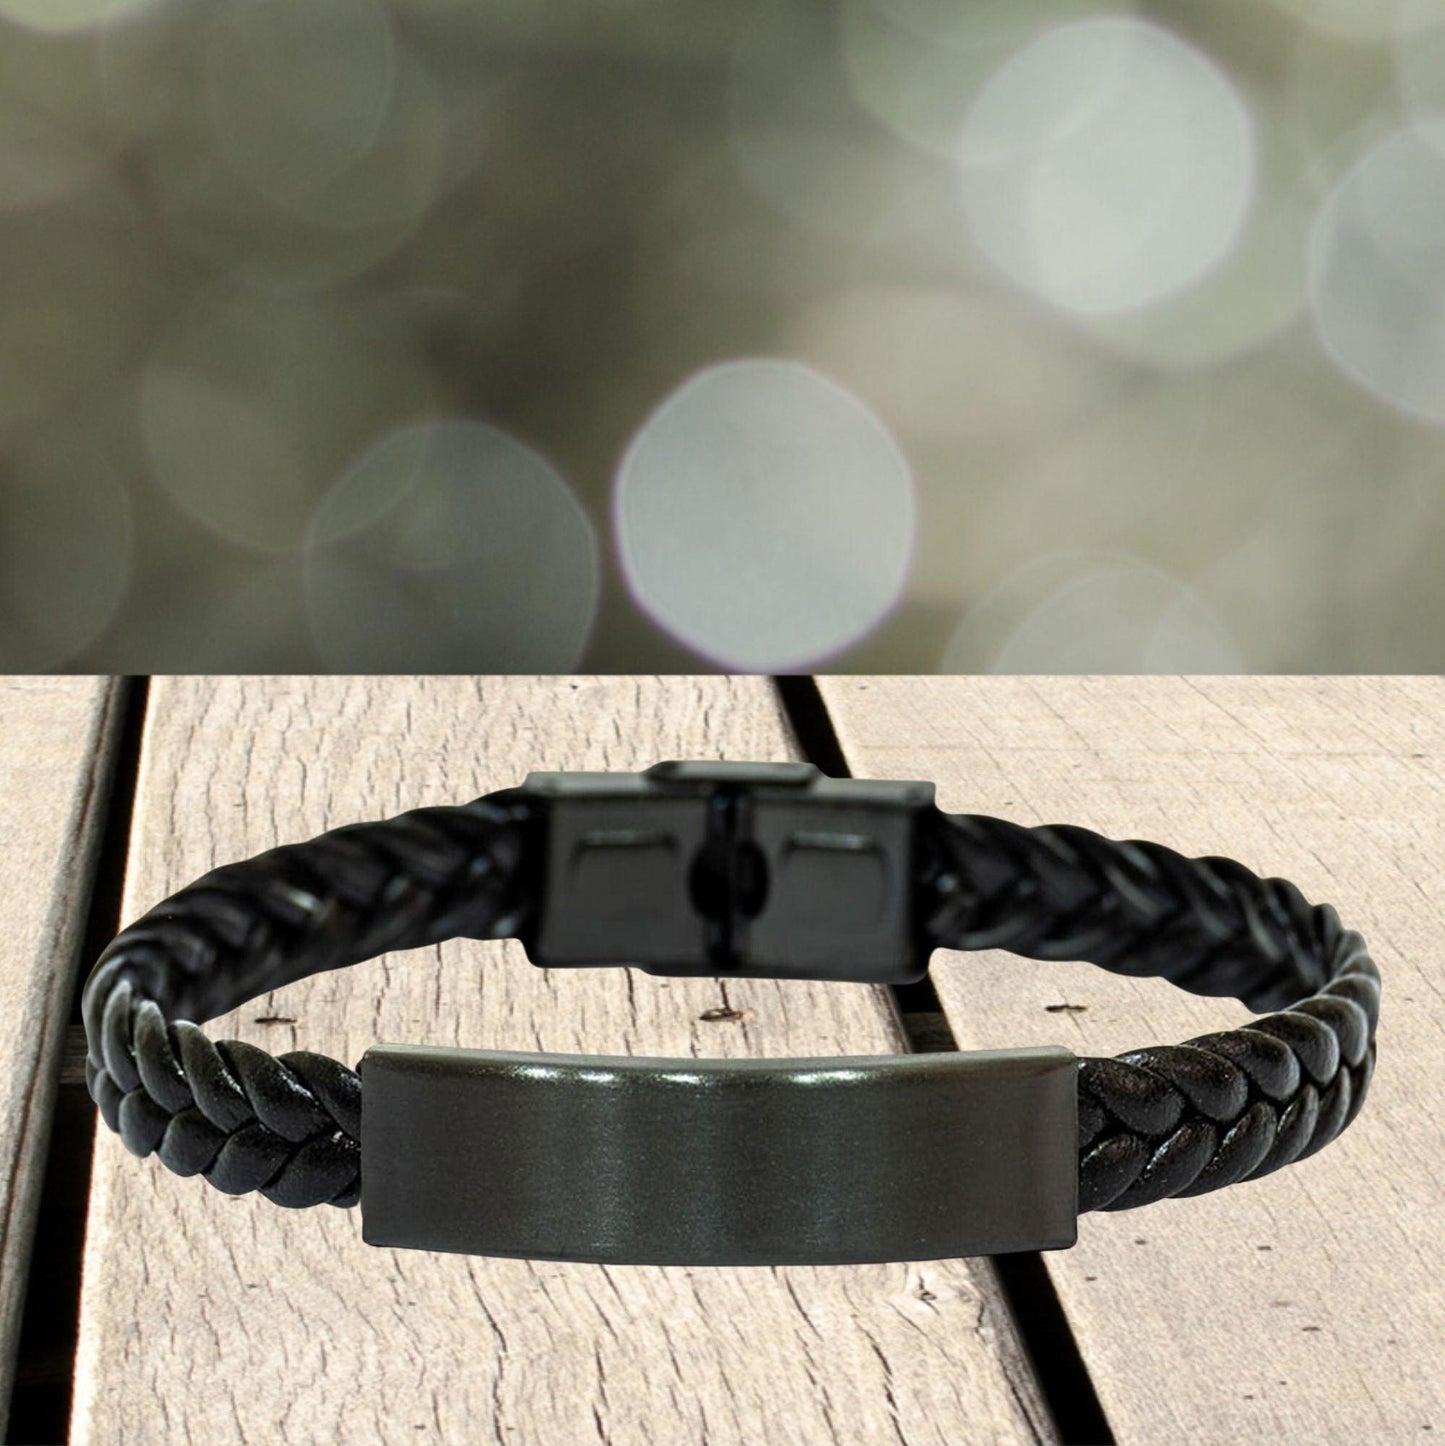 Remarkable General Manager Gifts, Your dedication and hard work, Inspirational Birthday Christmas Unique Braided Leather Bracelet For General Manager, Coworkers, Men, Women, Friends - Mallard Moon Gift Shop